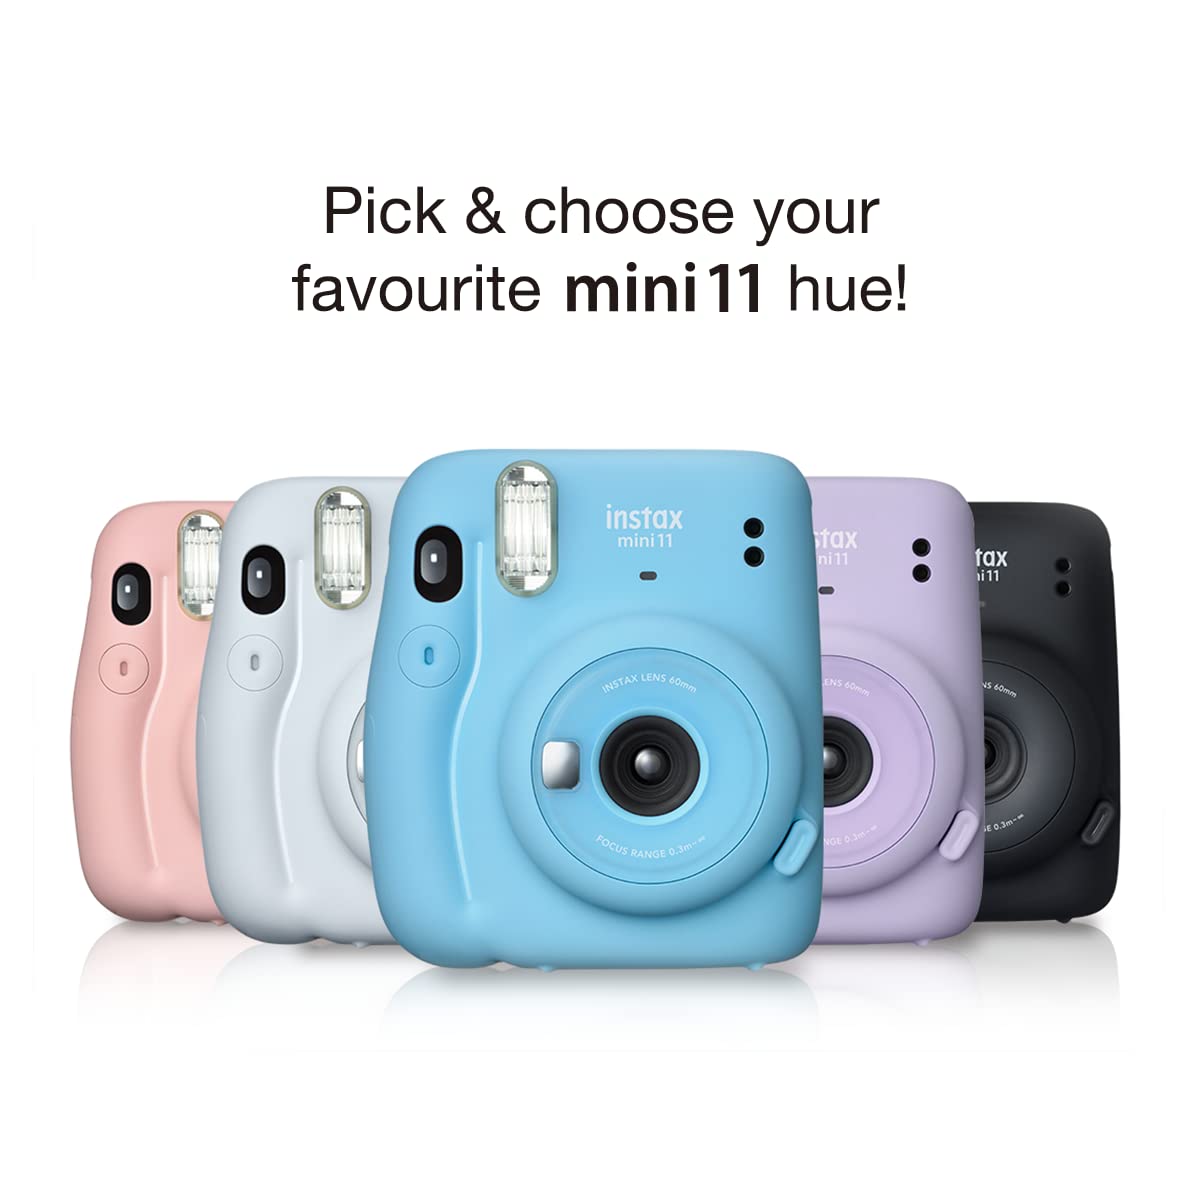 Fujifilm Instax Mini 11 Moments Forever Grey Color With 20 Shots Instant Camera